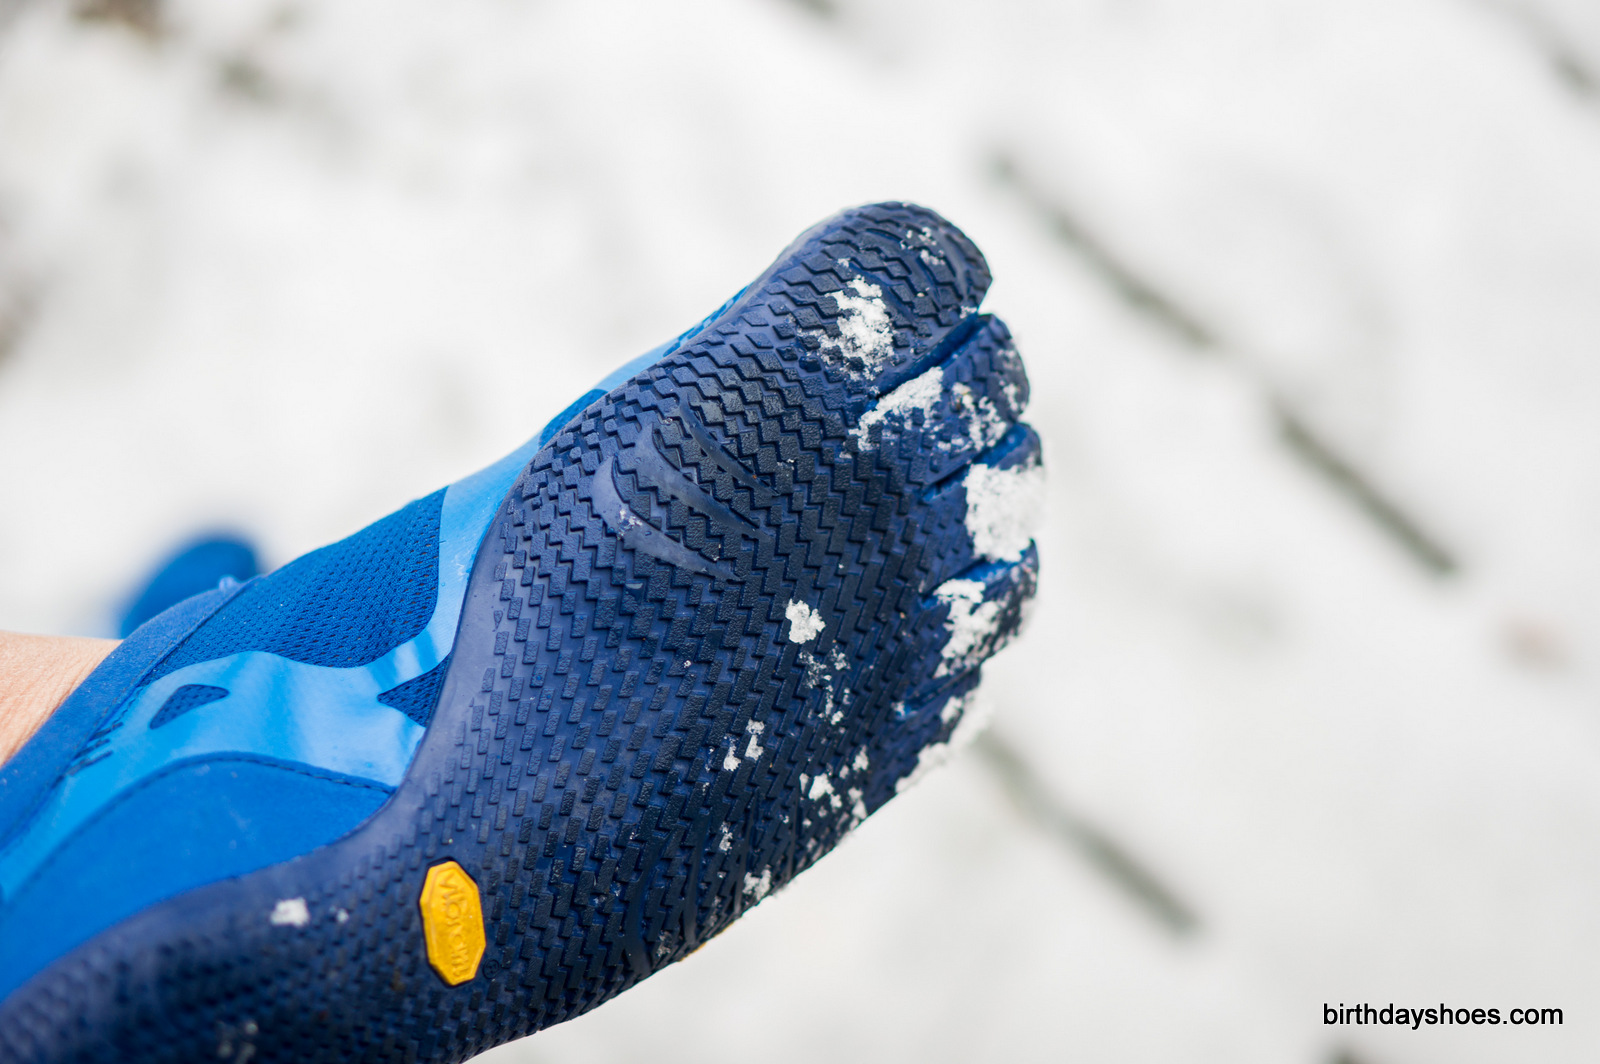 The KSO EVO sole is the same as the EL-X, the most minimalist FiveFingers sole available.